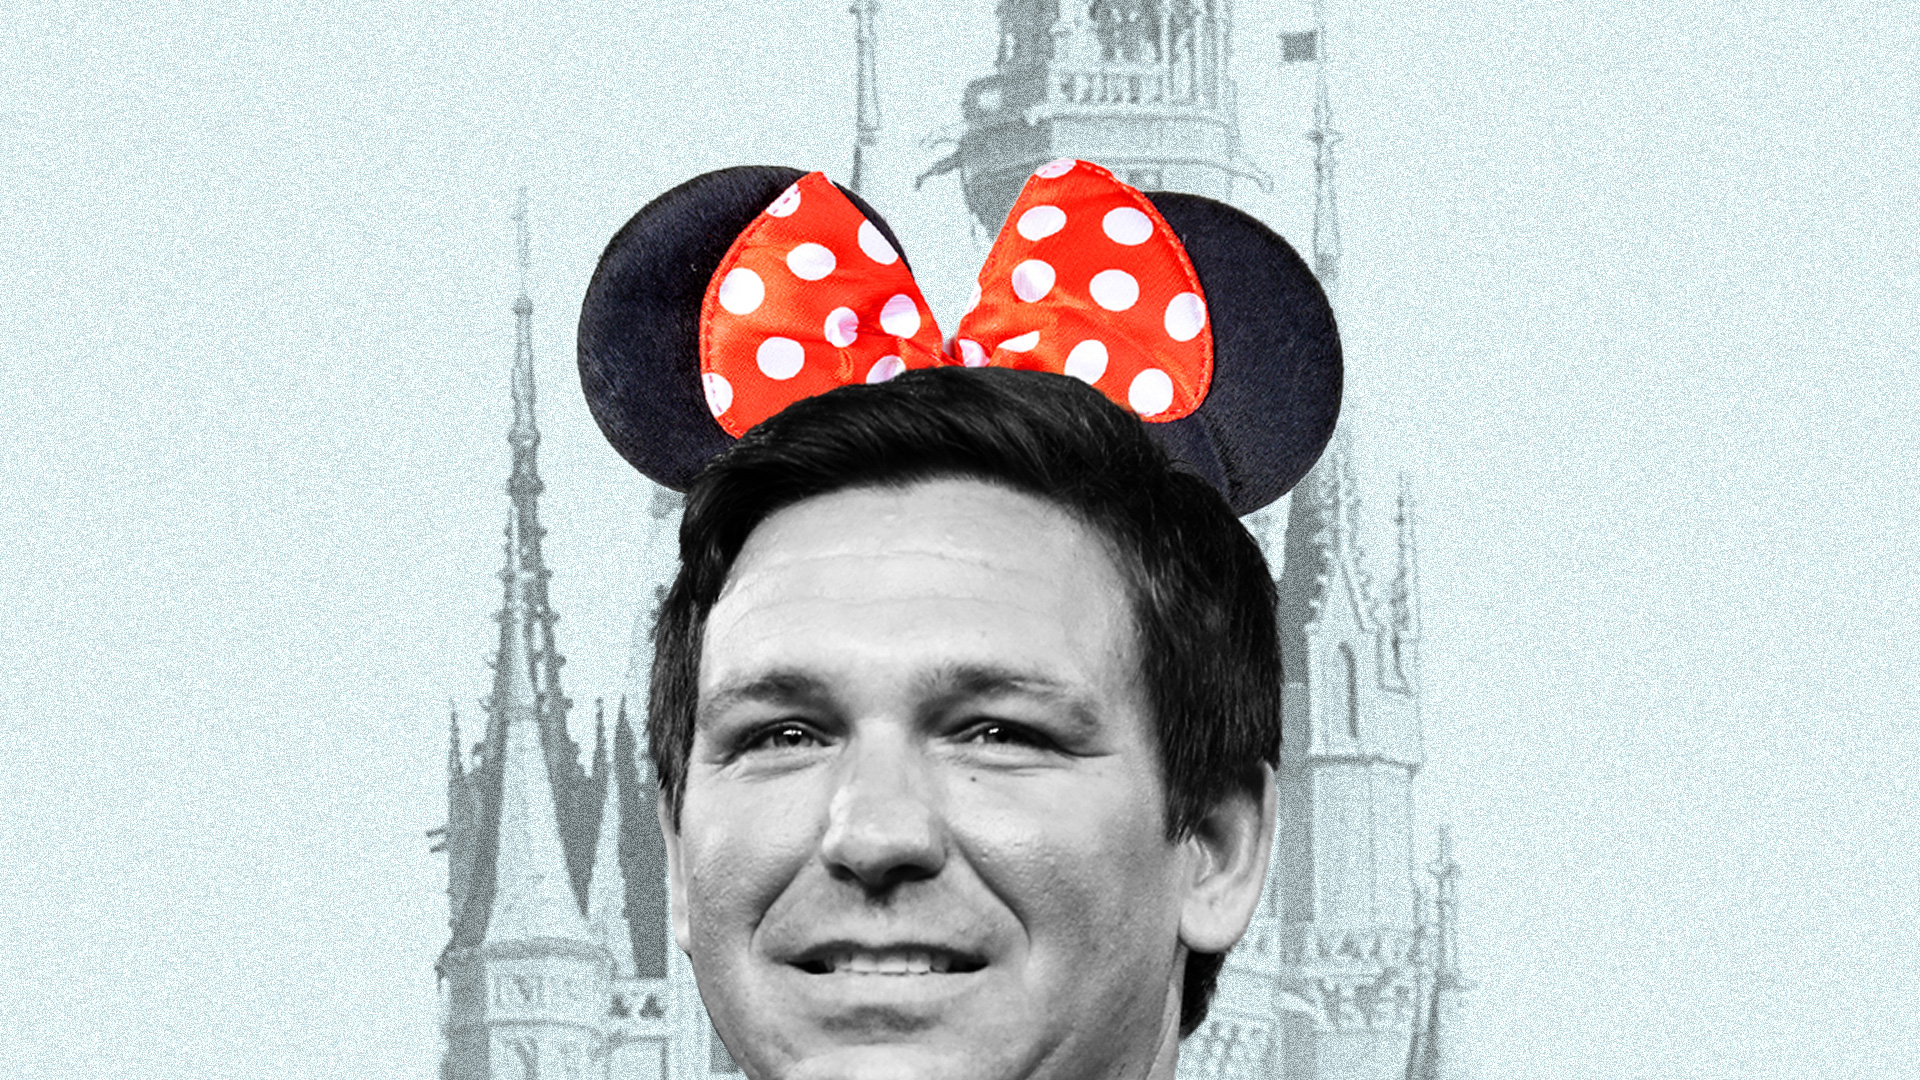 In a recent Wall Street Journal op-ed, Florida Governor Ron DeSantis excoriated US business leaders as woke ideologists and cultural Marxists.